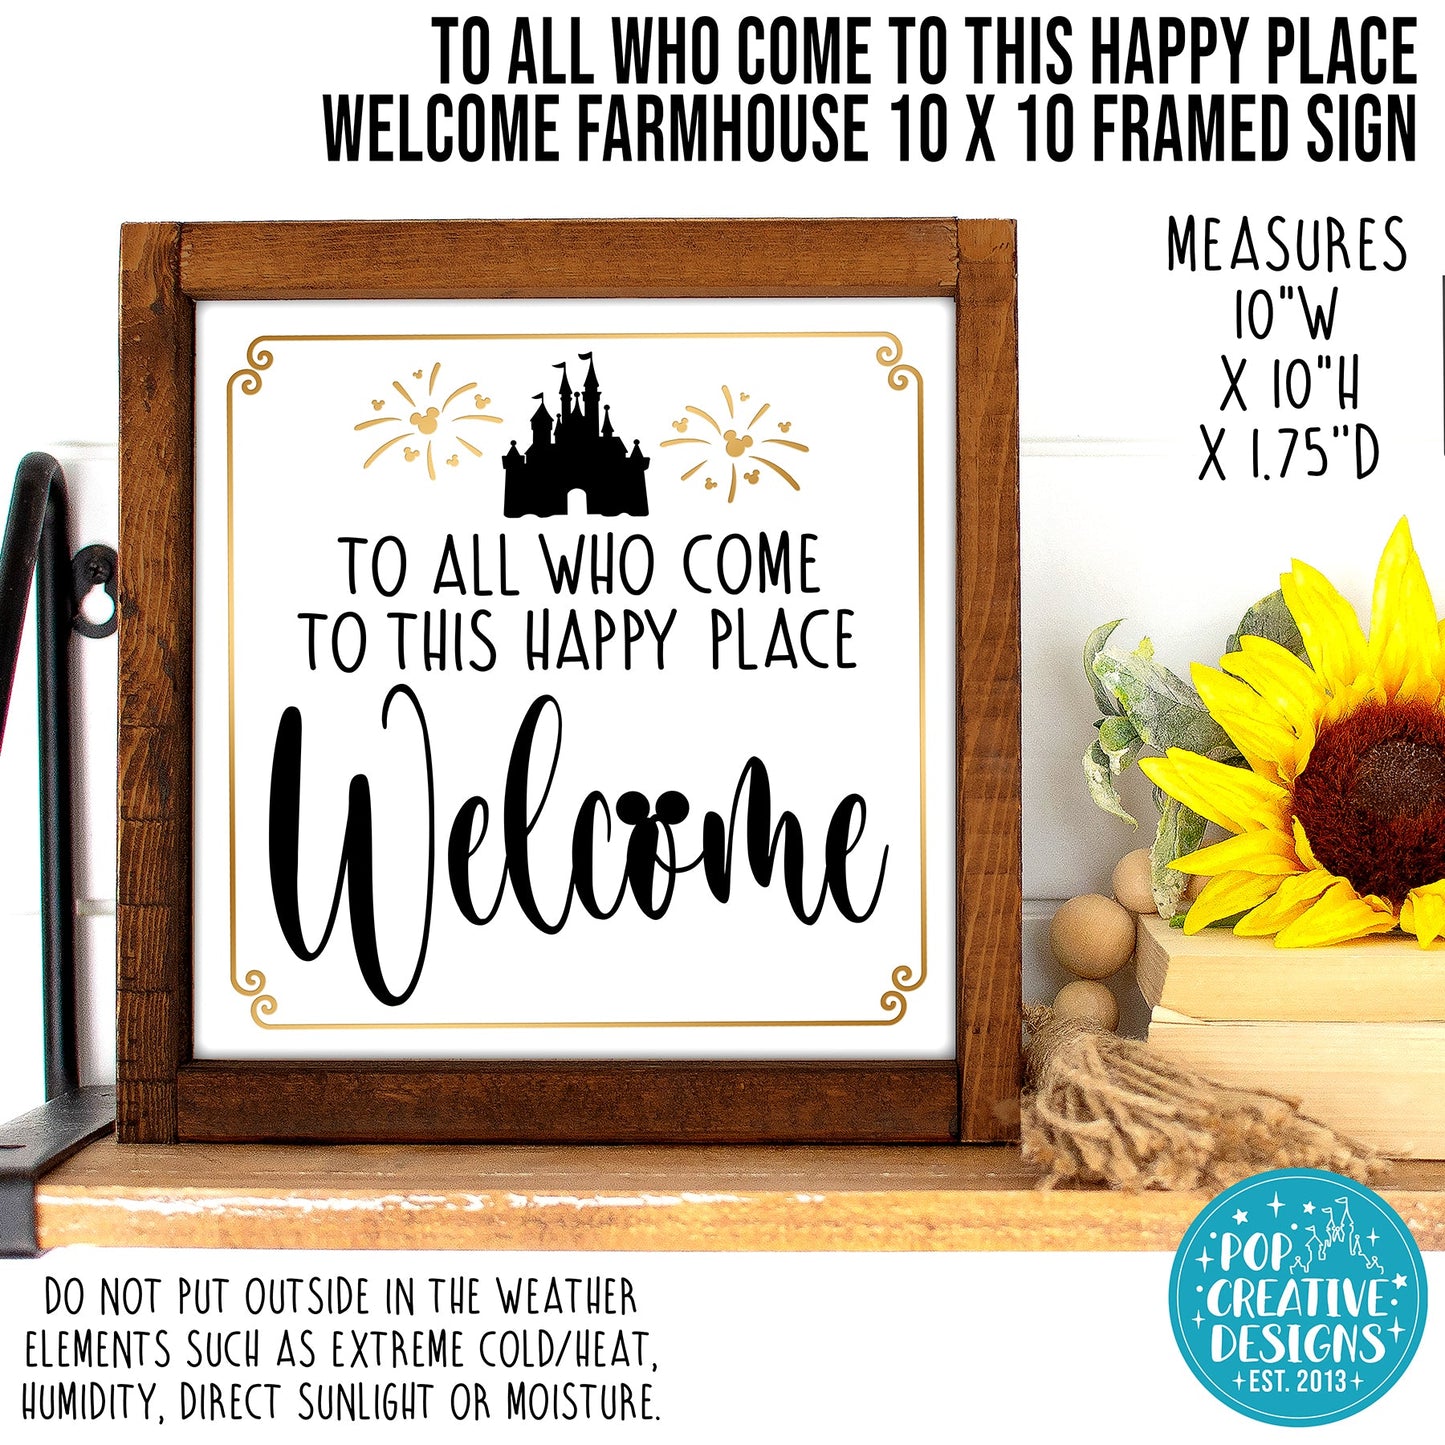 To All Who Come To This Happy Place Welcome Farmhouse 10 x 10 Framed Sign